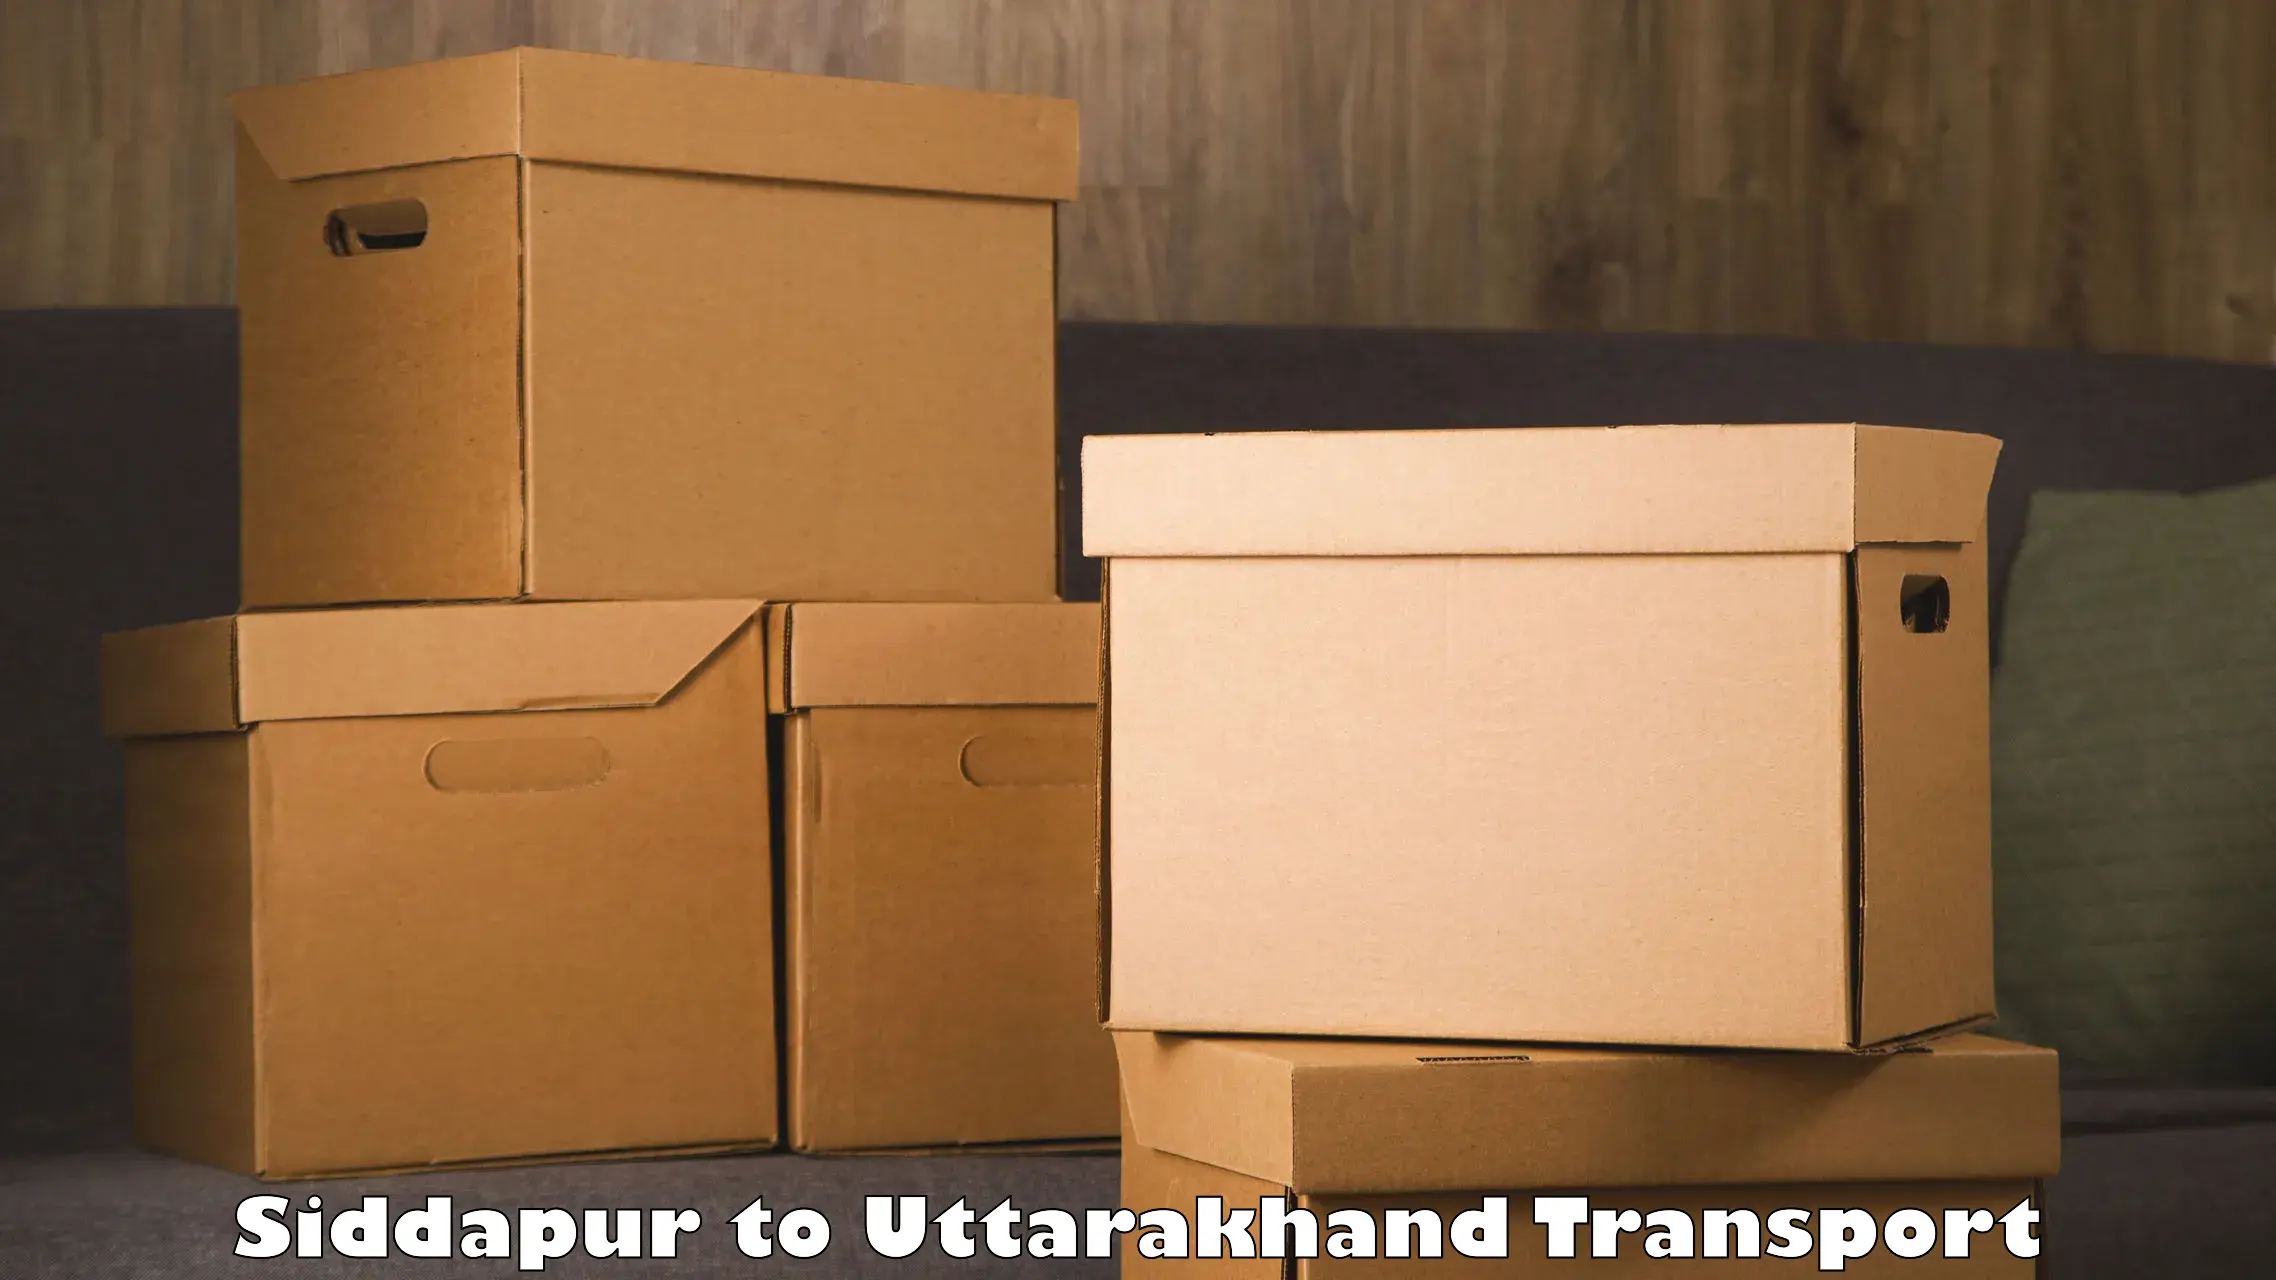 Truck transport companies in India Siddapur to Uttarakhand